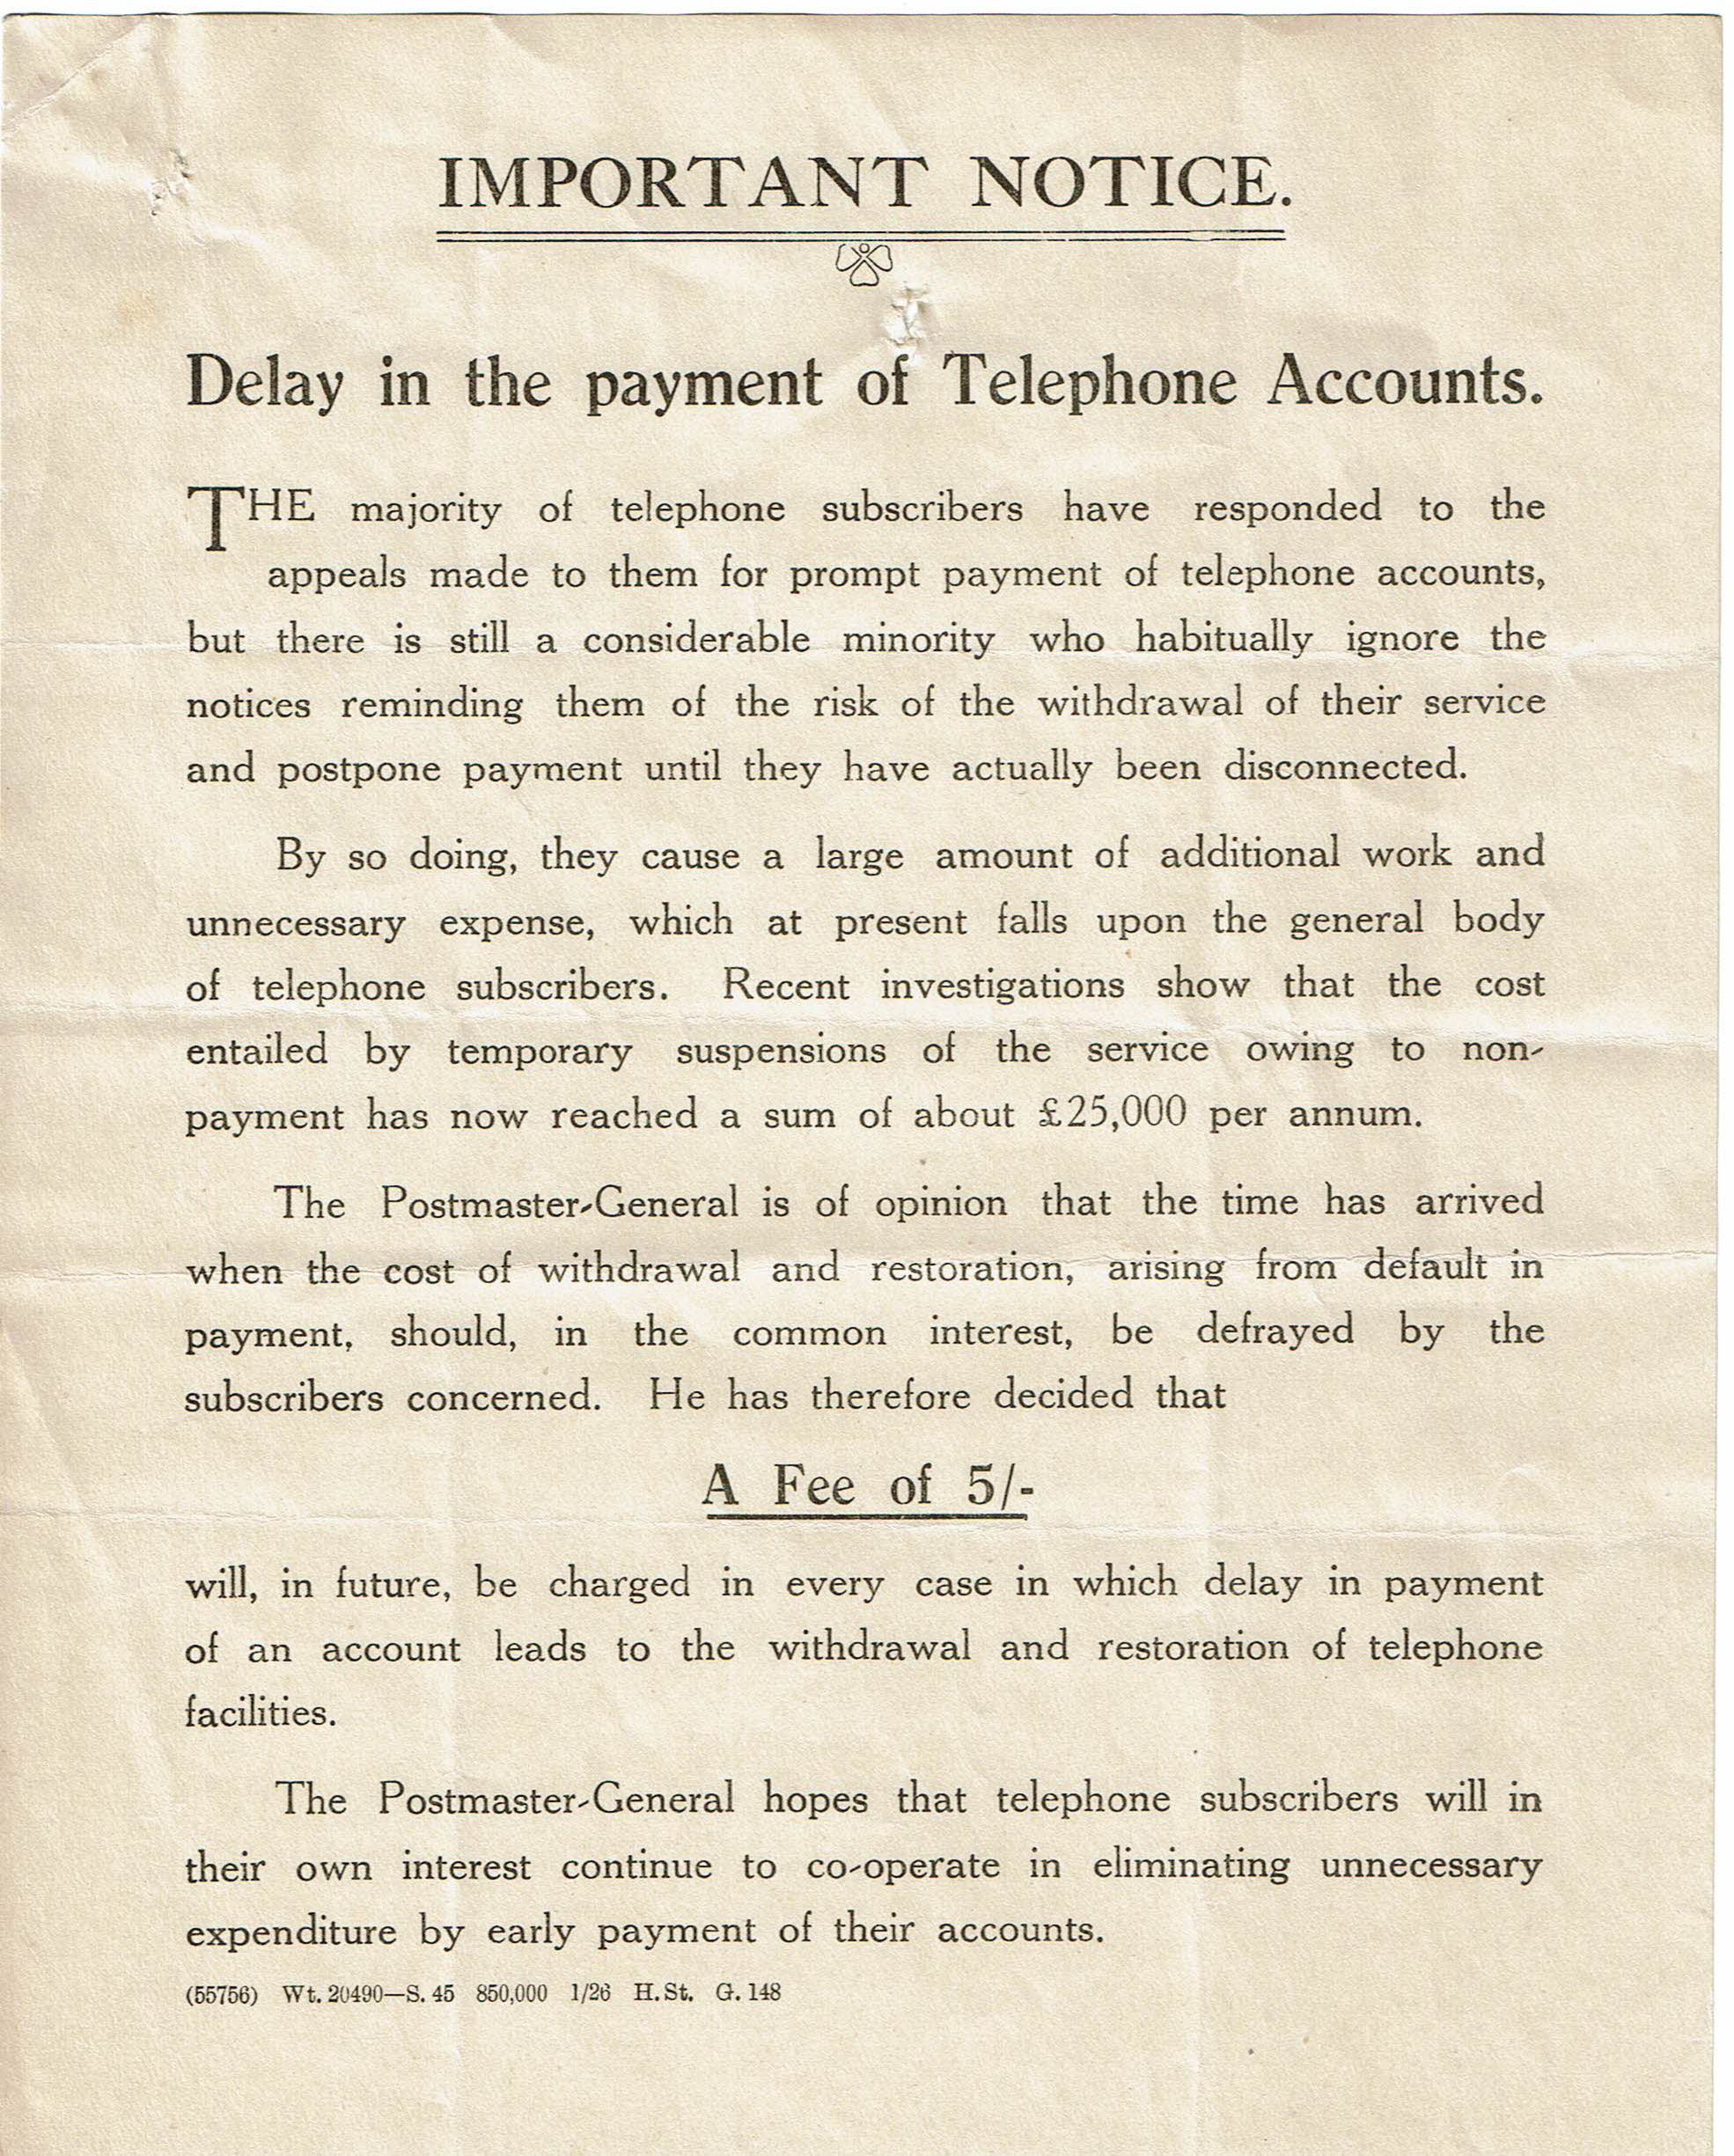 Telephone Late payment fine